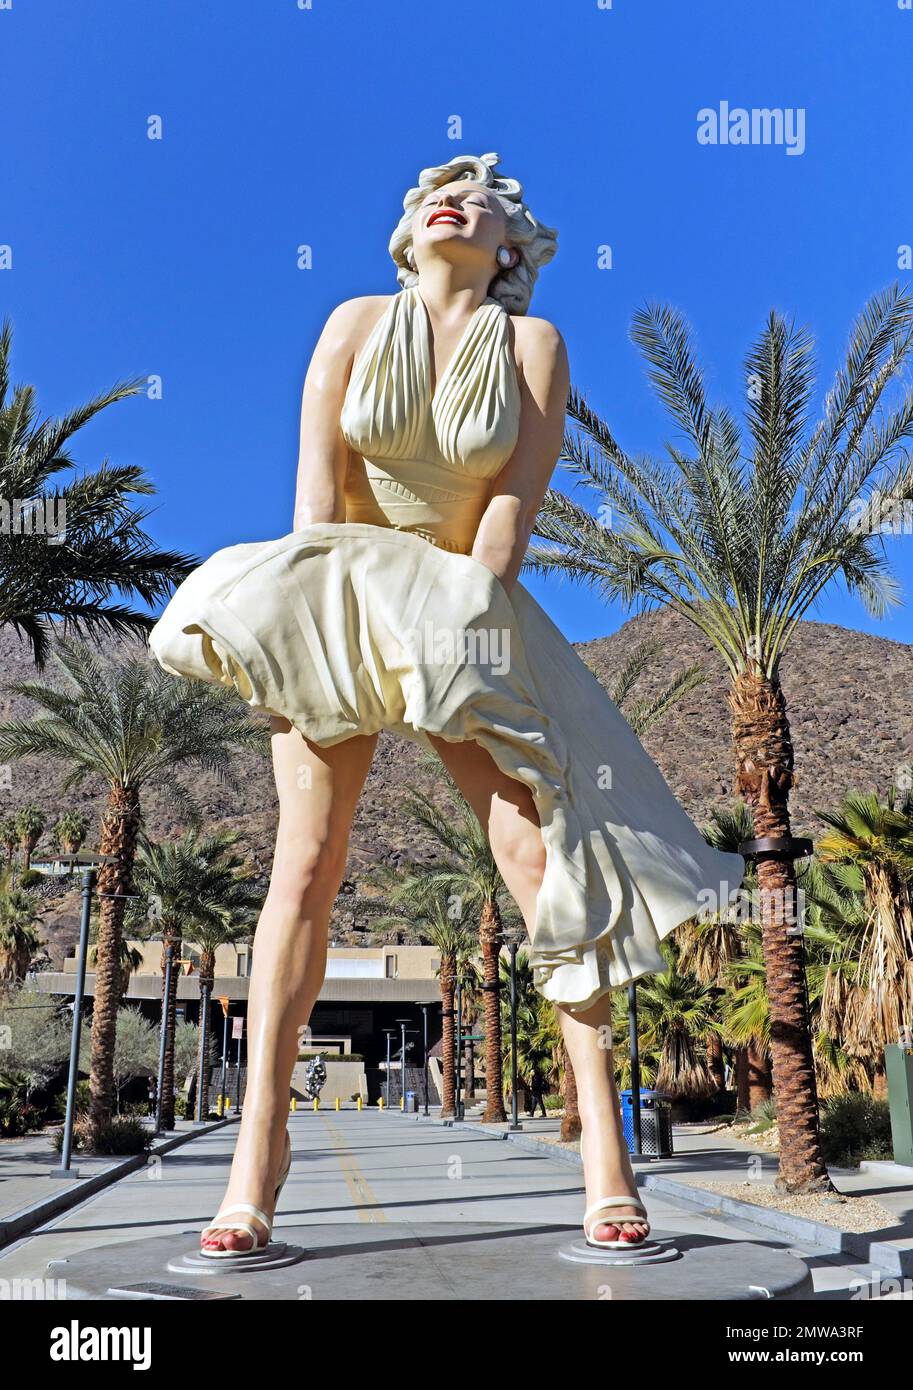 Forever Marilyn' Sculpture Nears Return To Downtown Palm Springs – NBC Palm  Springs